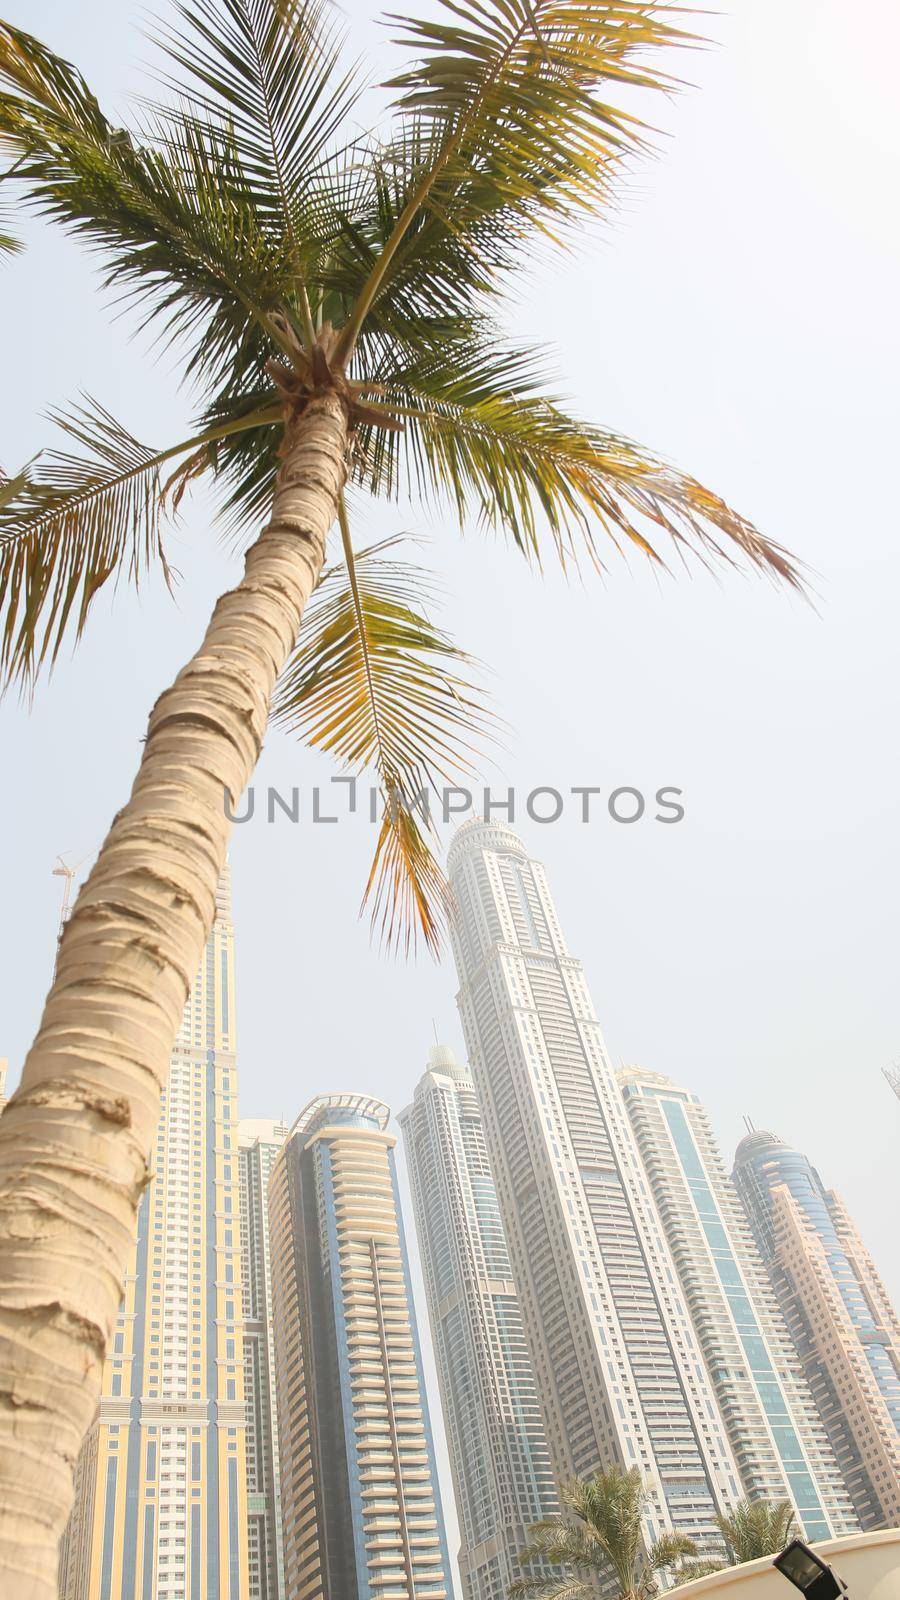 Residential skyscrapers with apartments against the backdrop of palm trees in Dubai. UAE